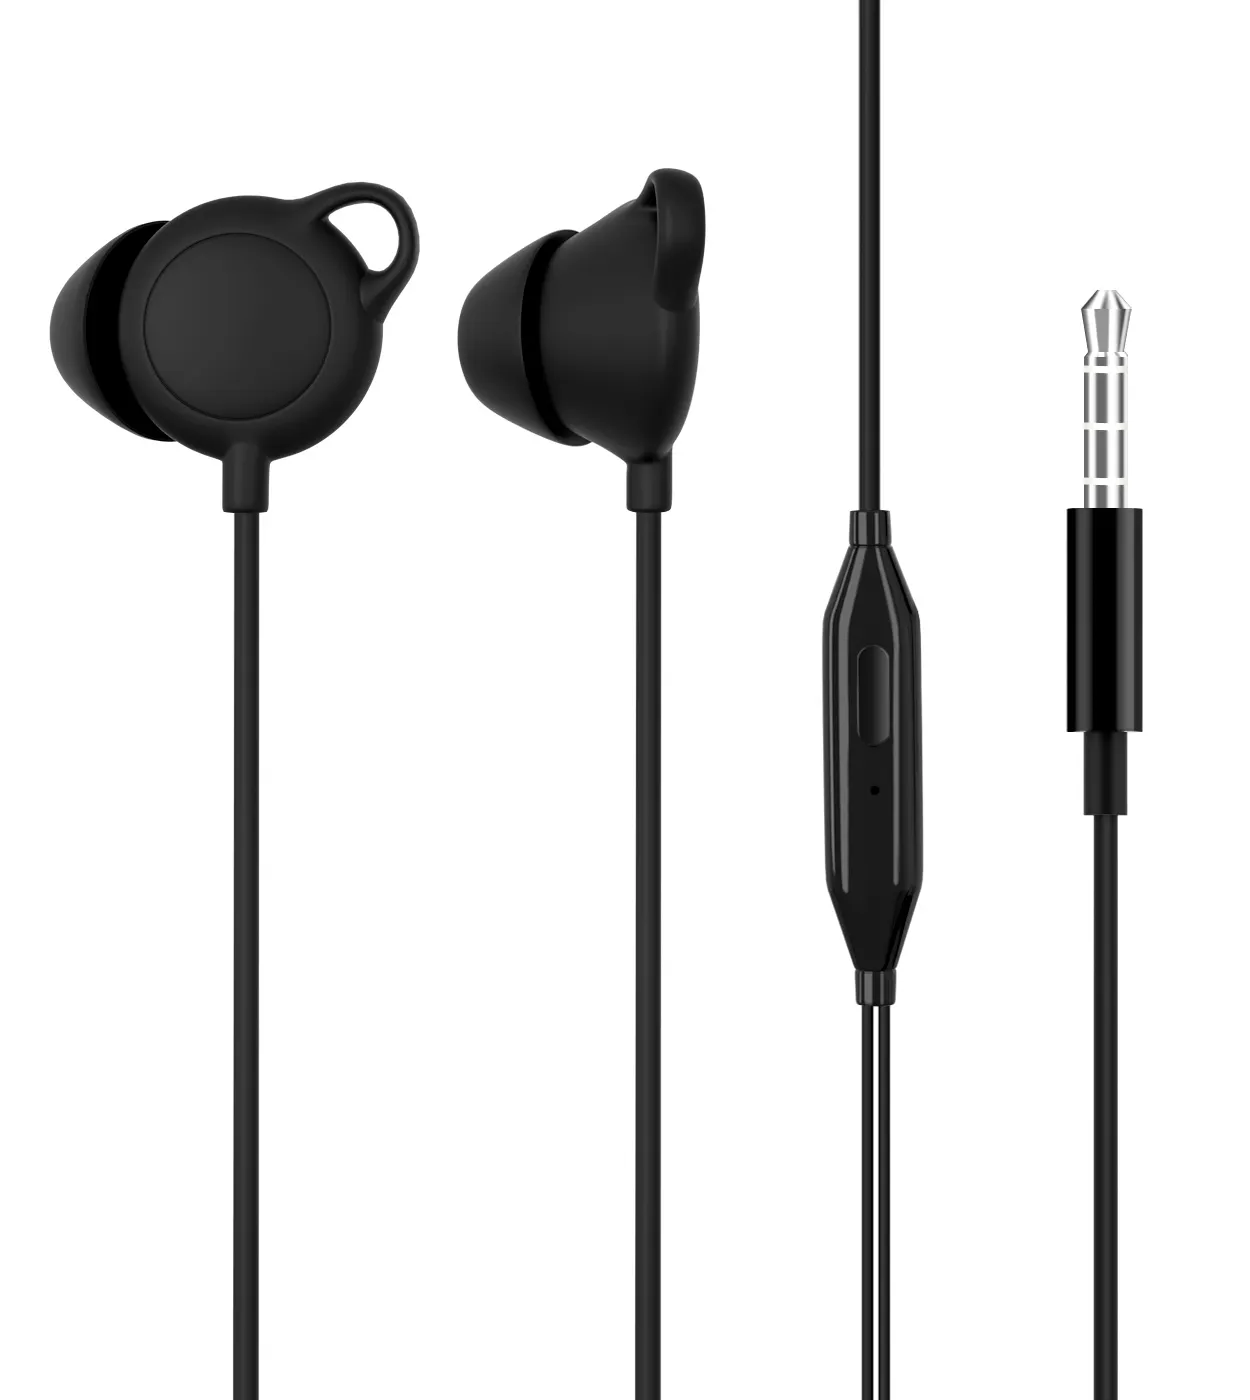 Noise Isolating Ear Plugs Sleep Earbuds Headphones with Unique Total Soft Silicone Perfect for Side Sleeper